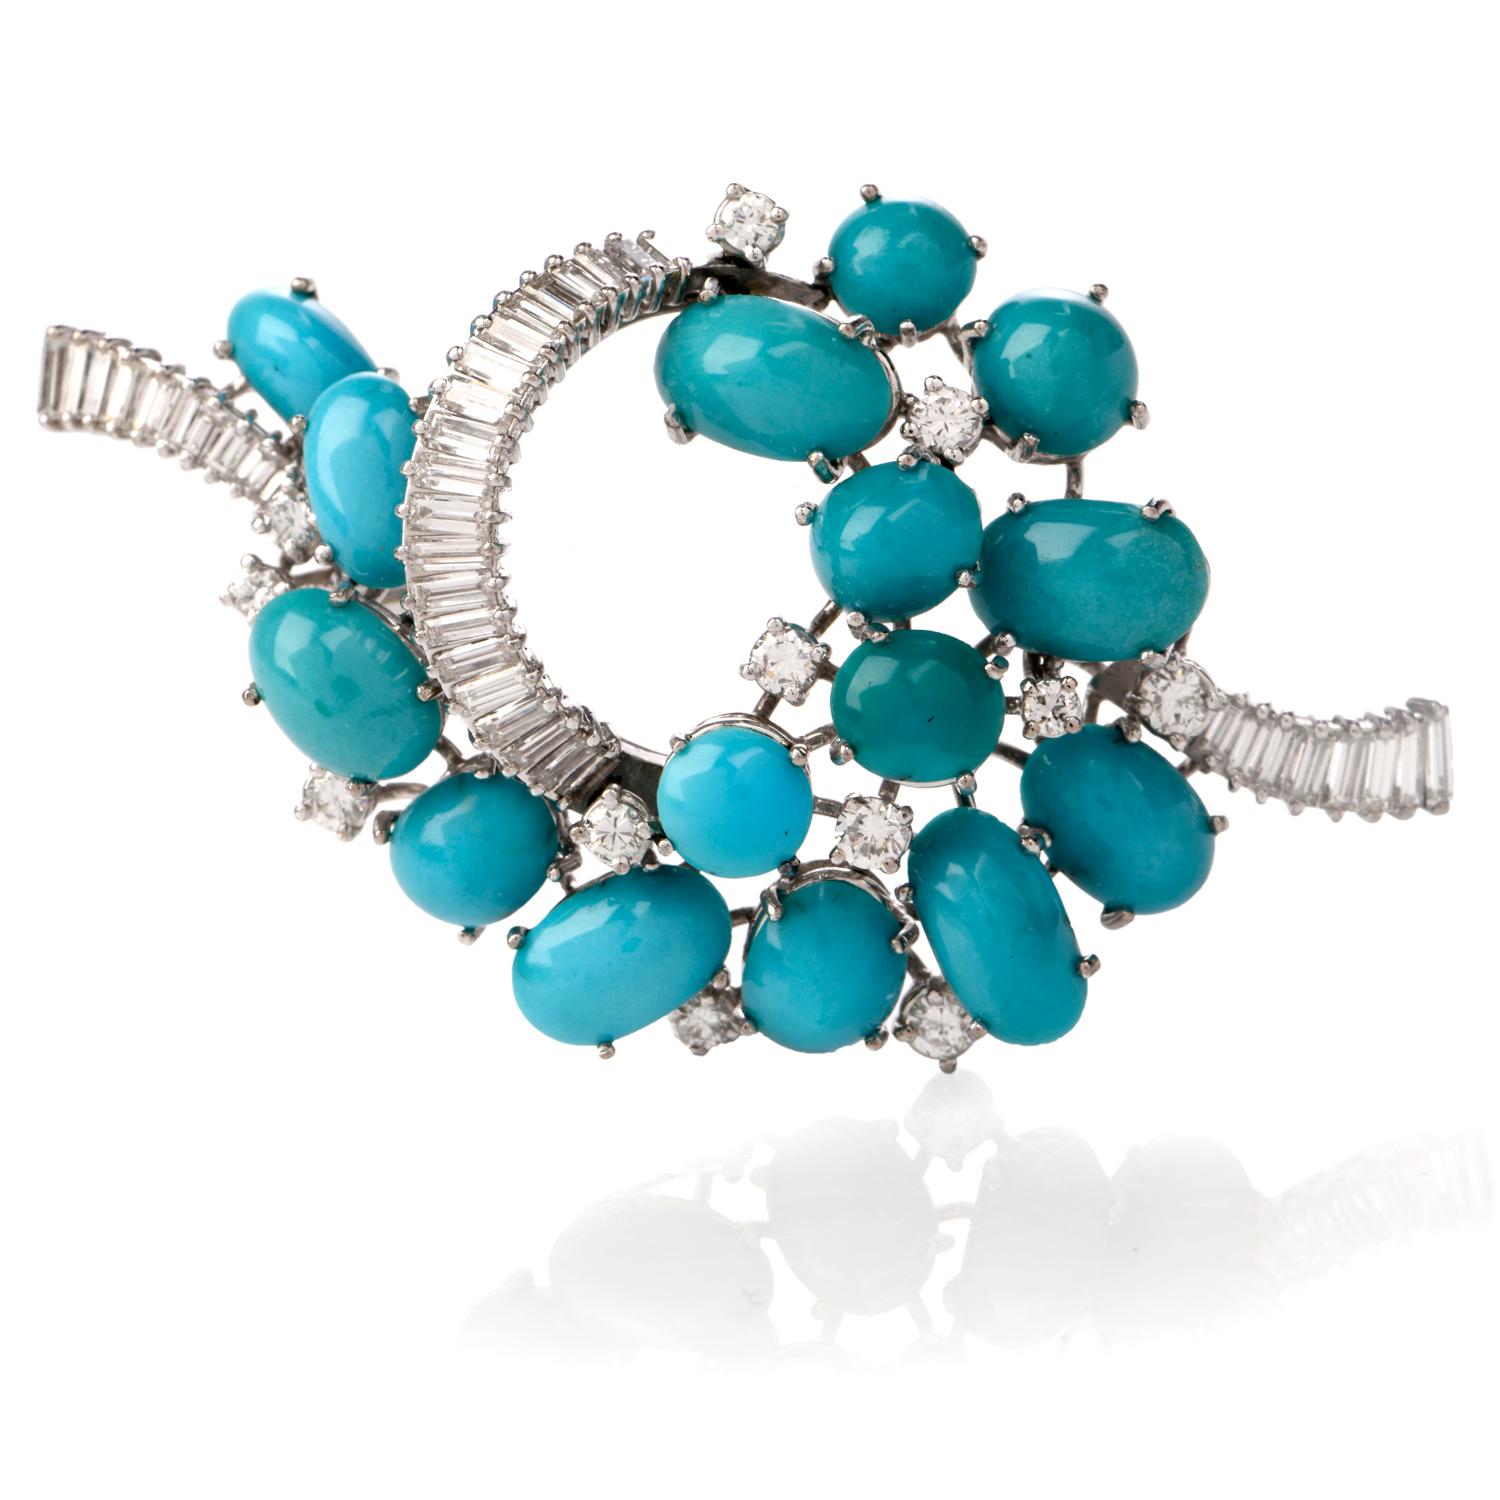 This shimerring designer diamond and turquoise pin brooch,circa 1960  is crafted in18-karat white gold, weighing 12.7 grams and measuring 54mm wide x 32mm long. Composed of  15 prong-set Persian turquoise cabochons of round and oval shape approx.